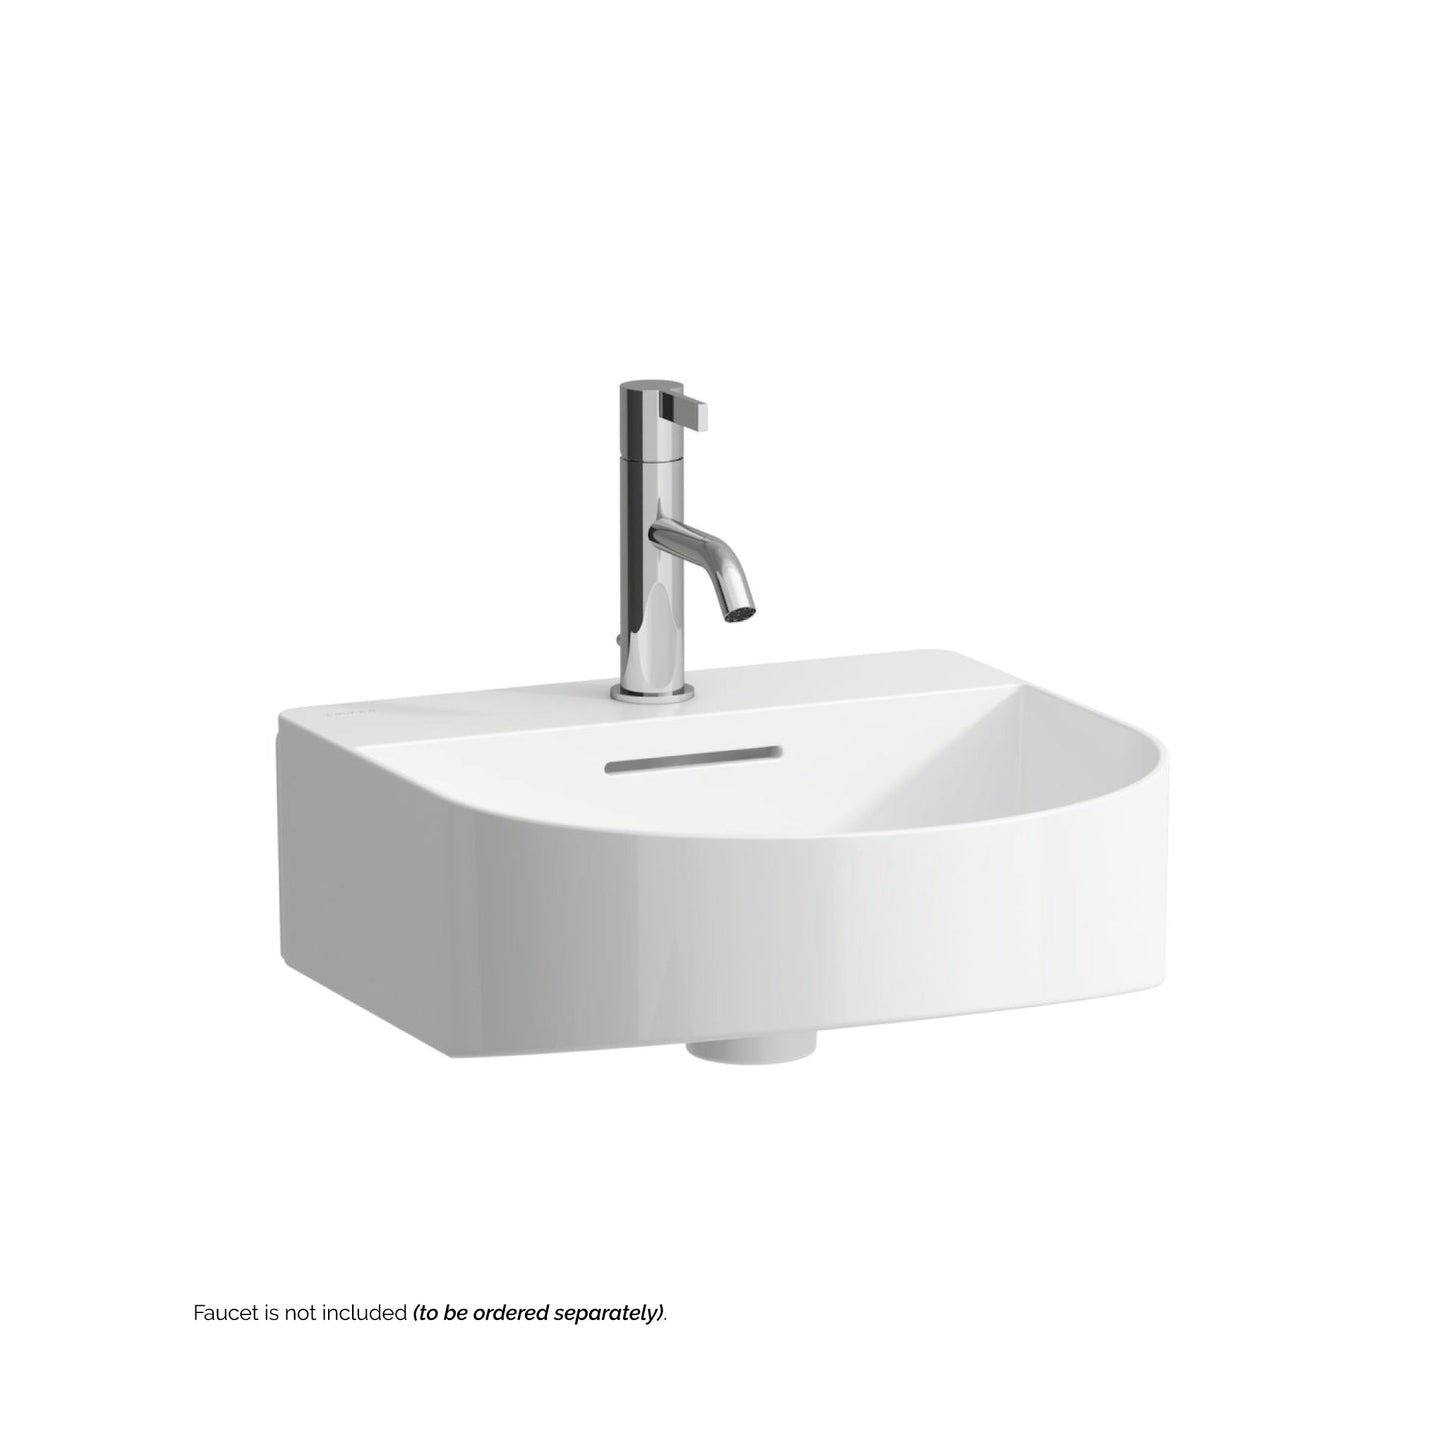 Laufen Sonar 16" Matte White Ceramic Wall-Mounted Bathroom Sink With Faucet Hole